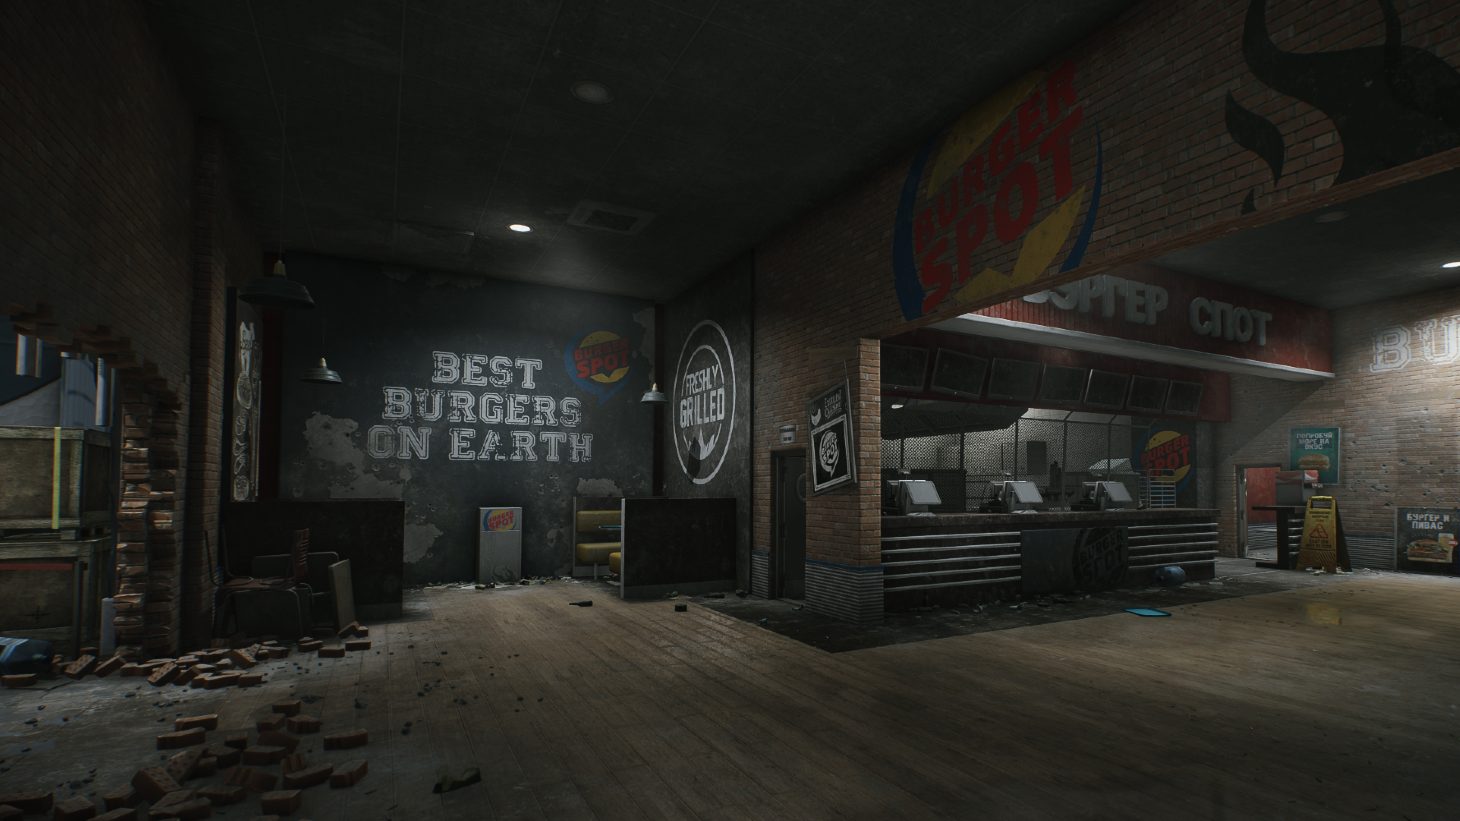 Escape From Tarkov Arena Release Date: A burger restraunt can be seen